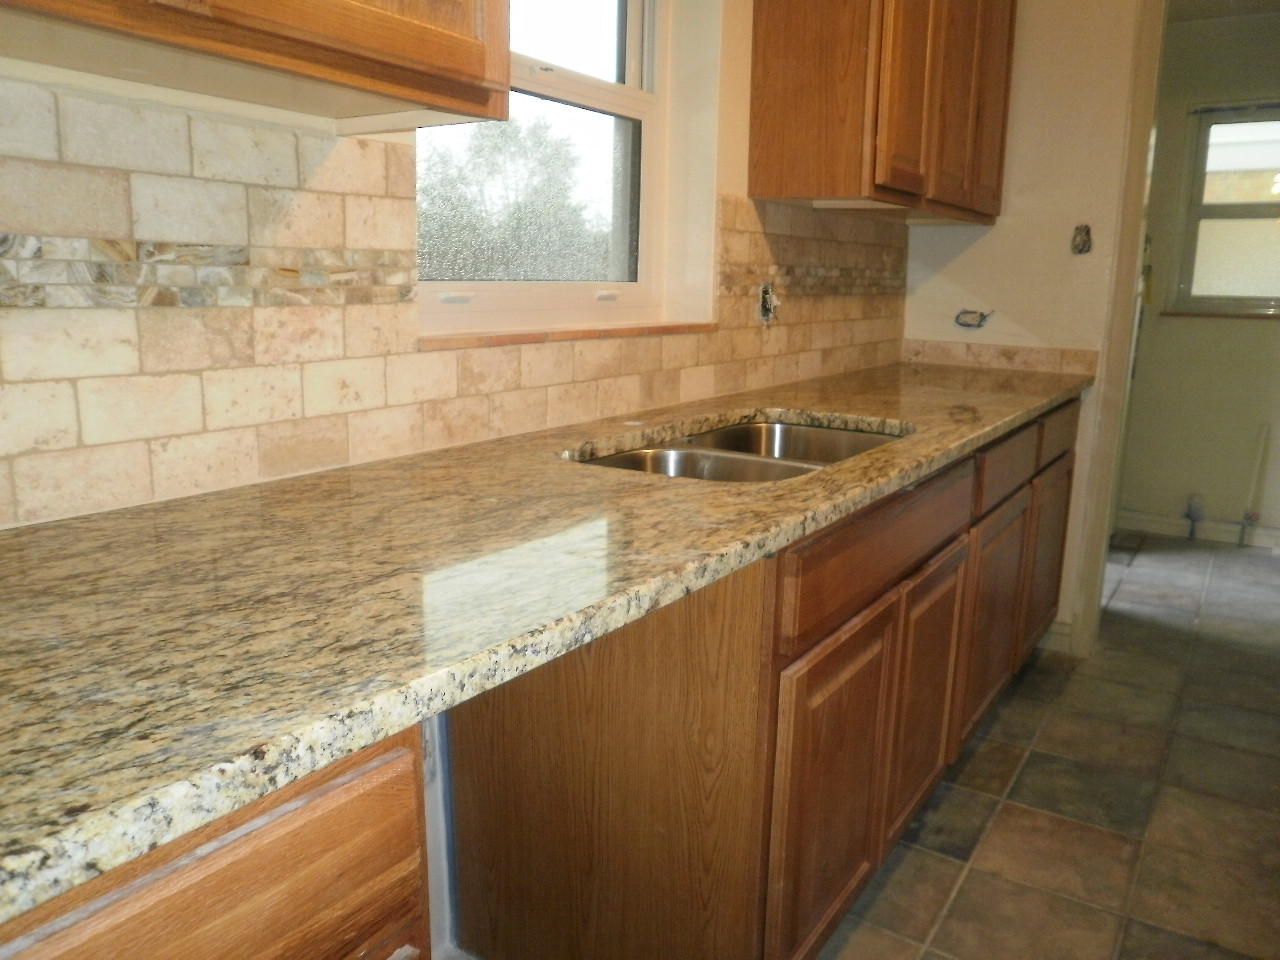 Kitchen Backsplash With Oak Cabinets
 Integrity Installations A division of Front